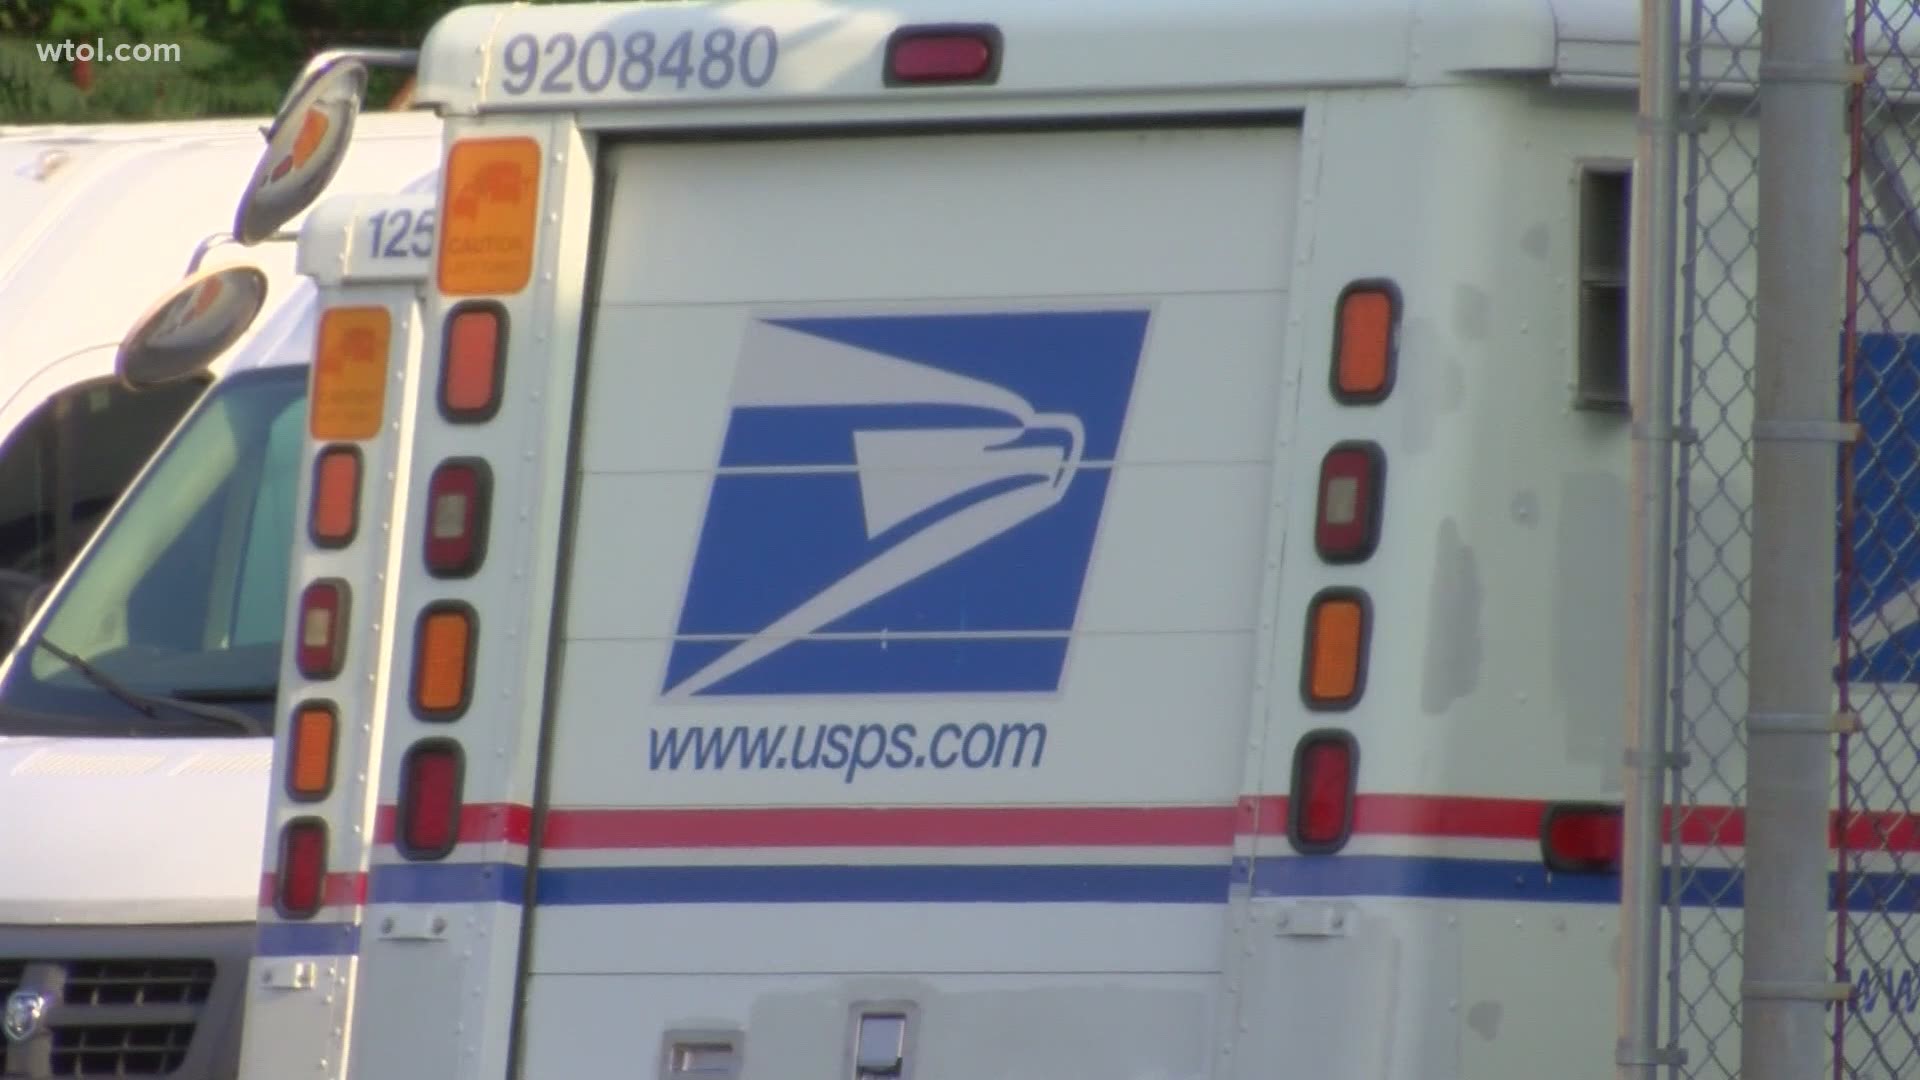 Many of you are raising concerns about the your mail and packages coming late